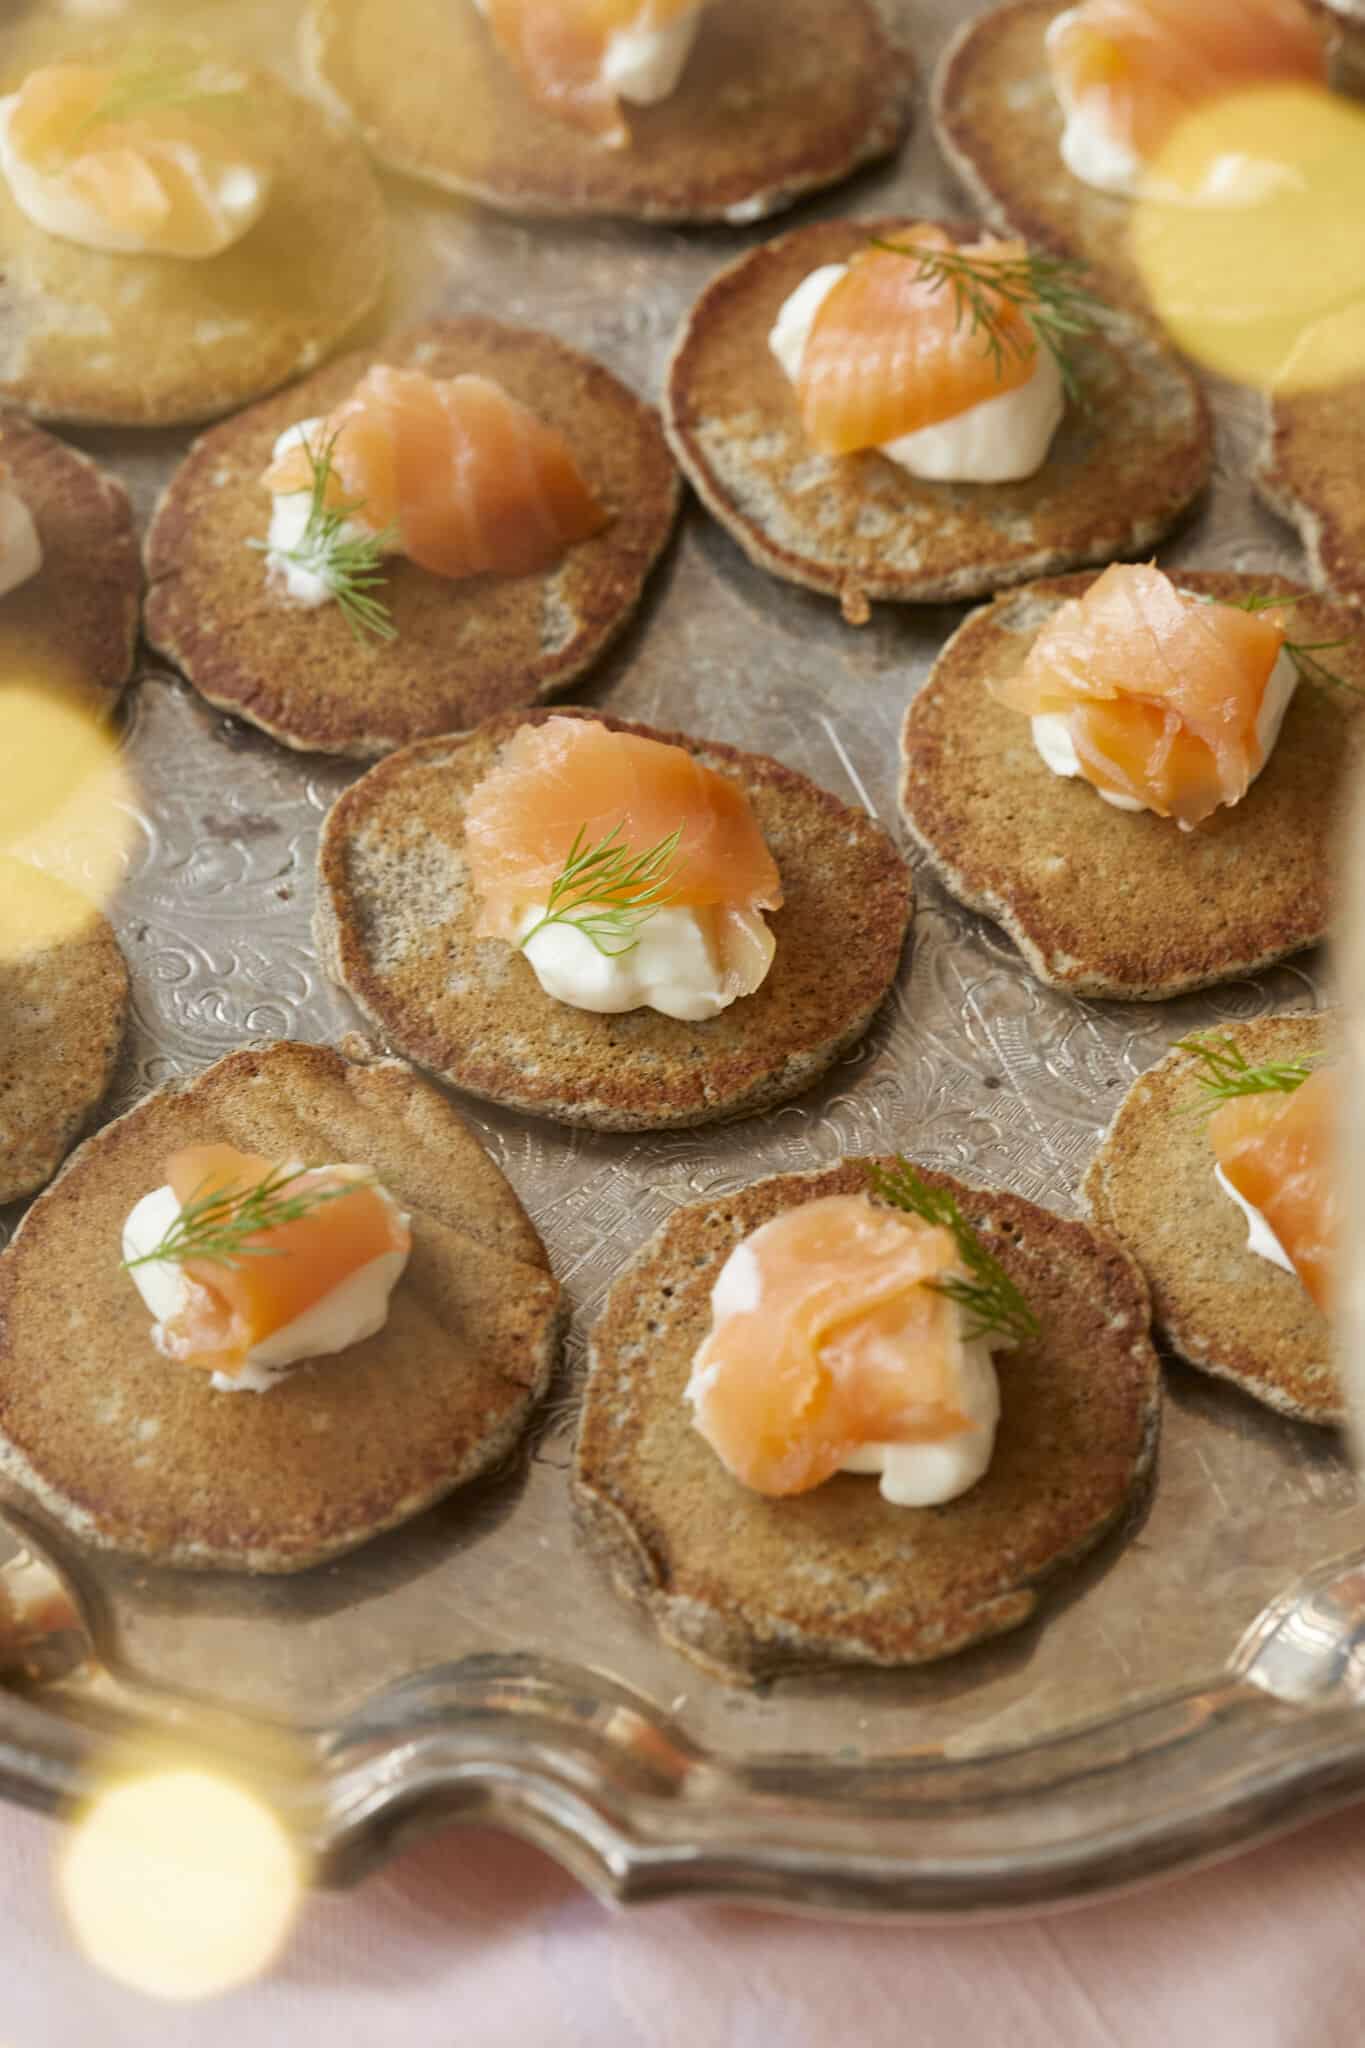 Small buckwheat pancakes, are fried and topped with crème fraîche and smoked salmon, served on a big silver platter. 